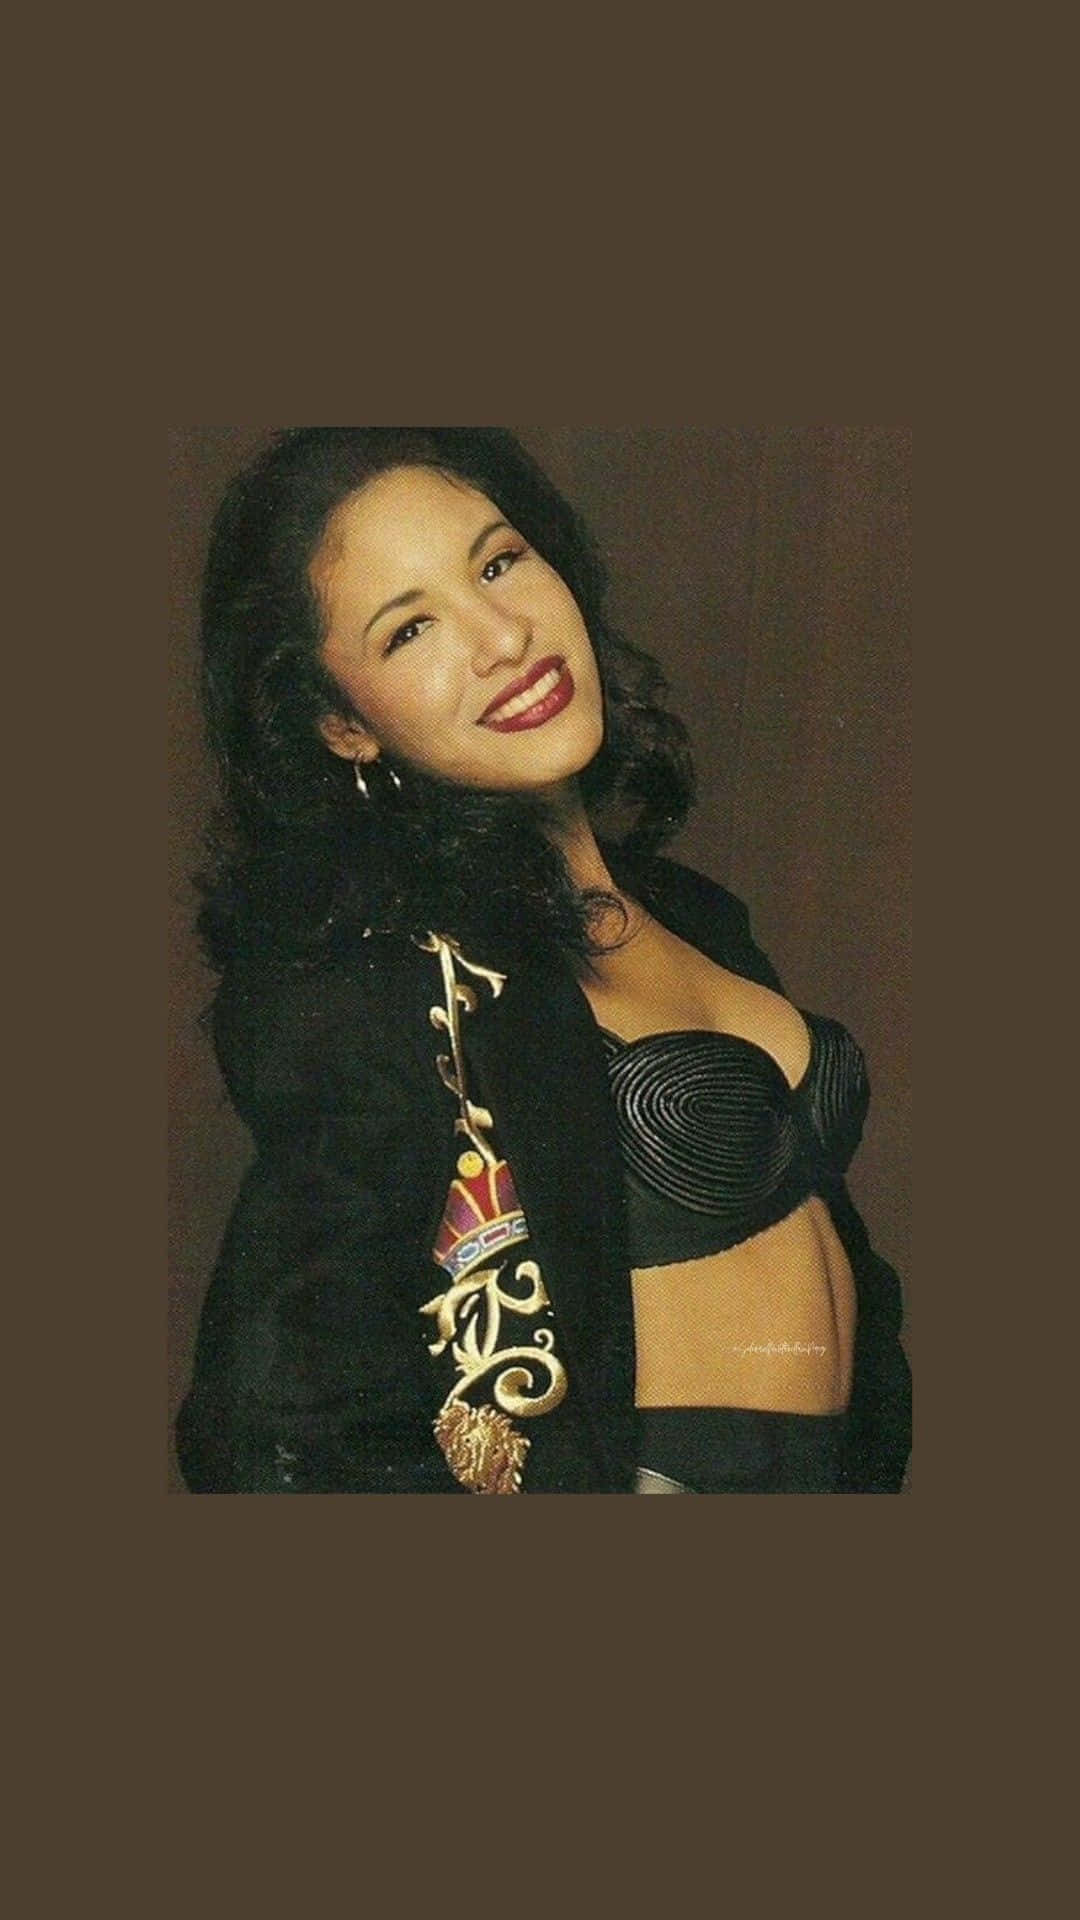 Feel the love and power of Selena Quintanilla with this exclusive iPhone Wallpaper